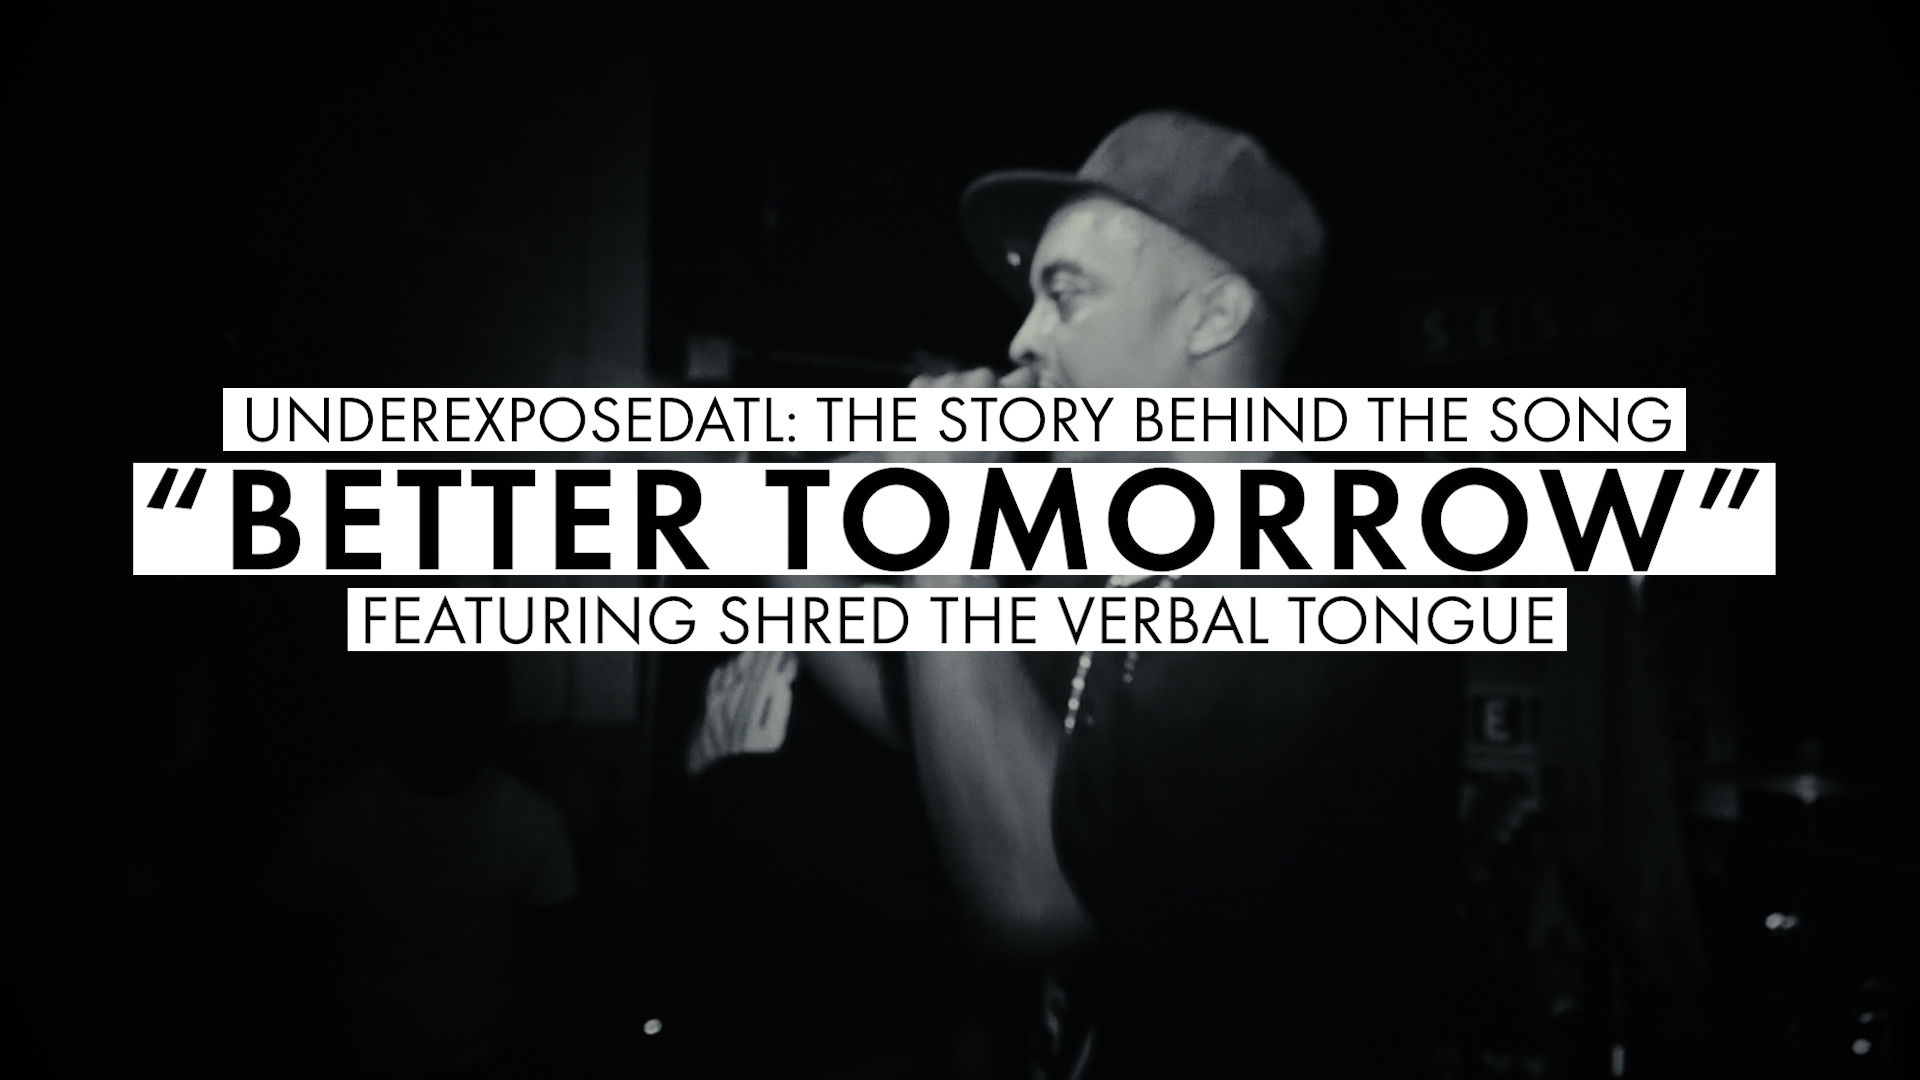 The Story Behind the Song: "Better Tomorrow"